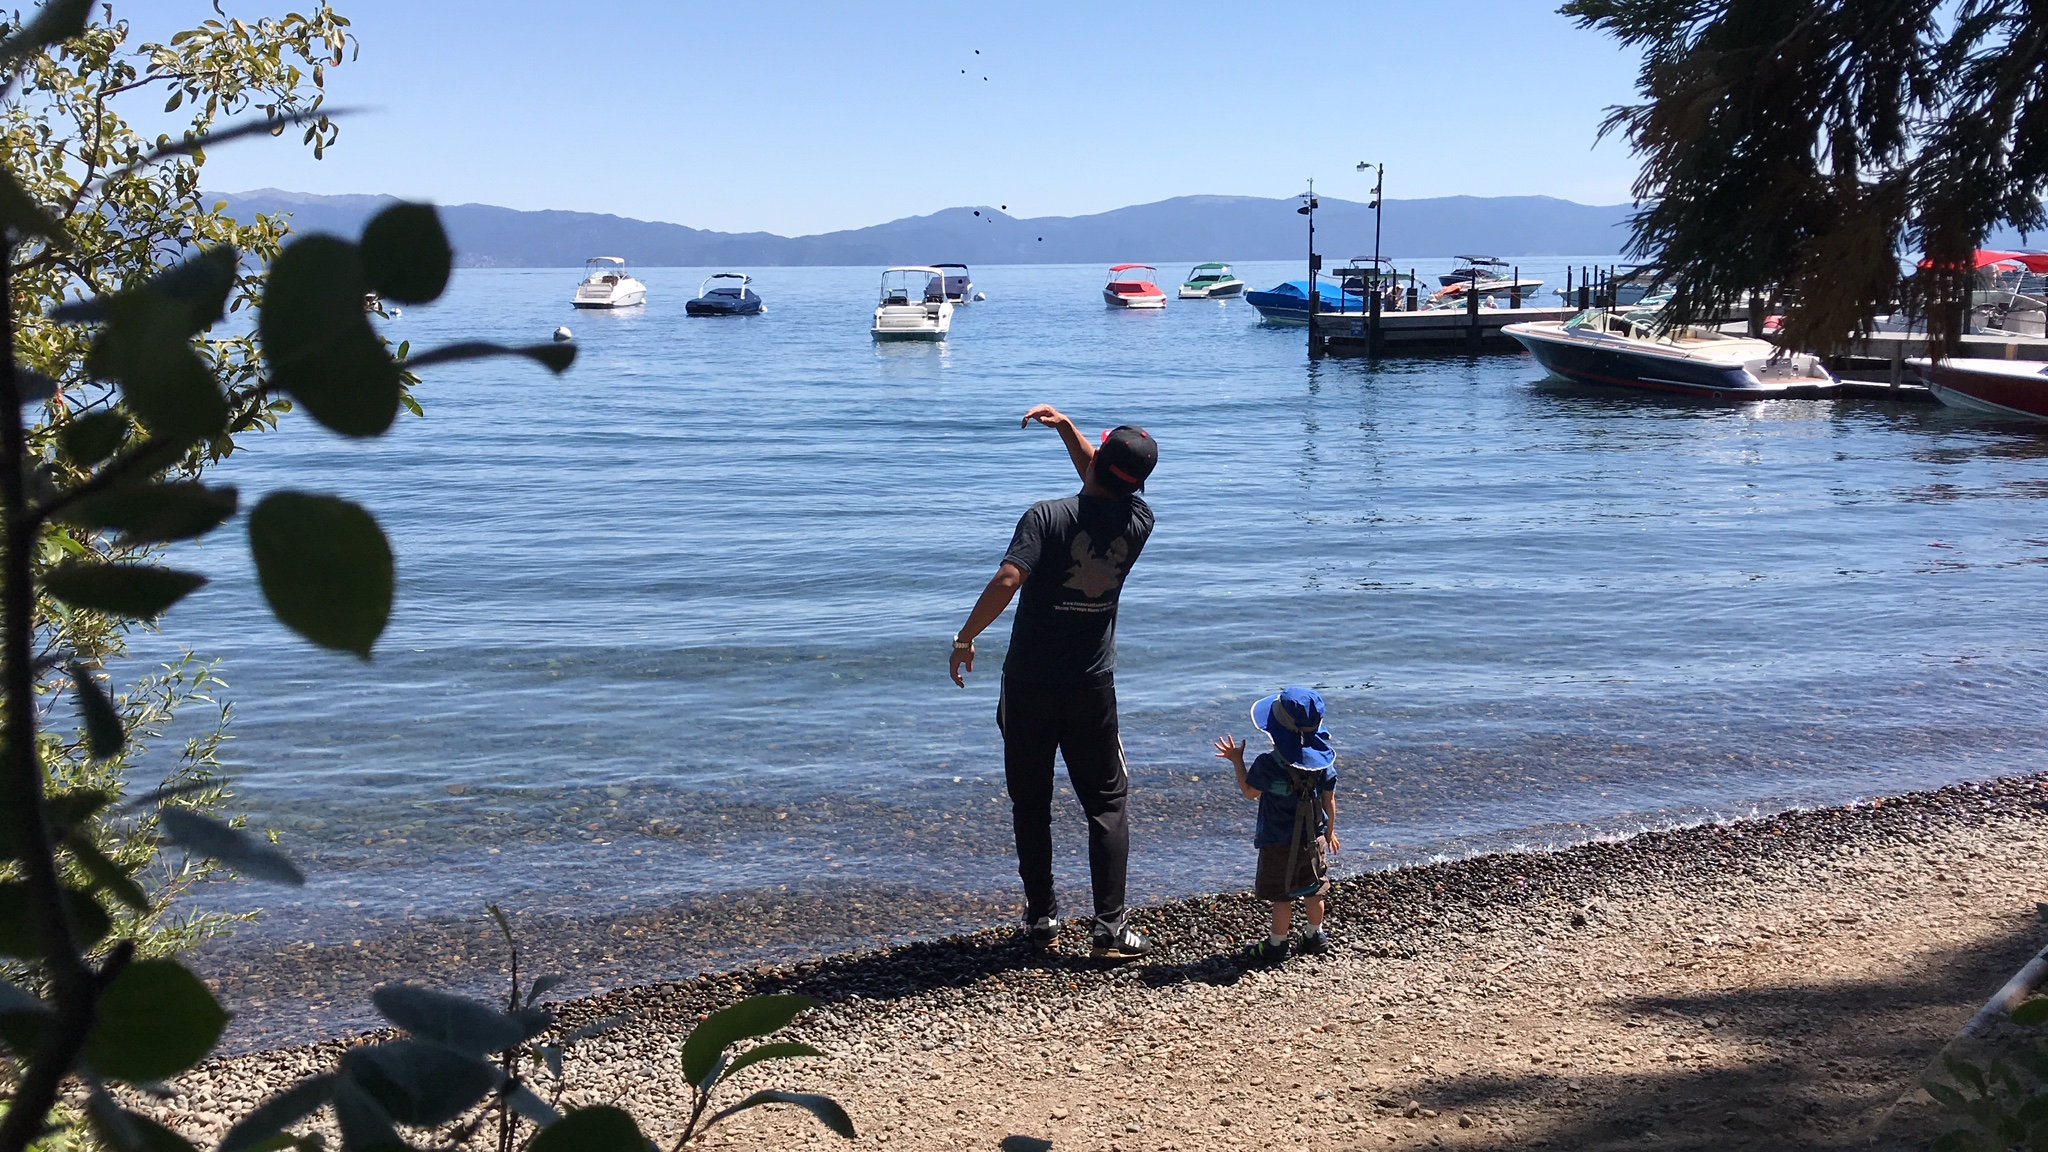 Lake Tahoe Vacation Property With Financial Samurai And Son